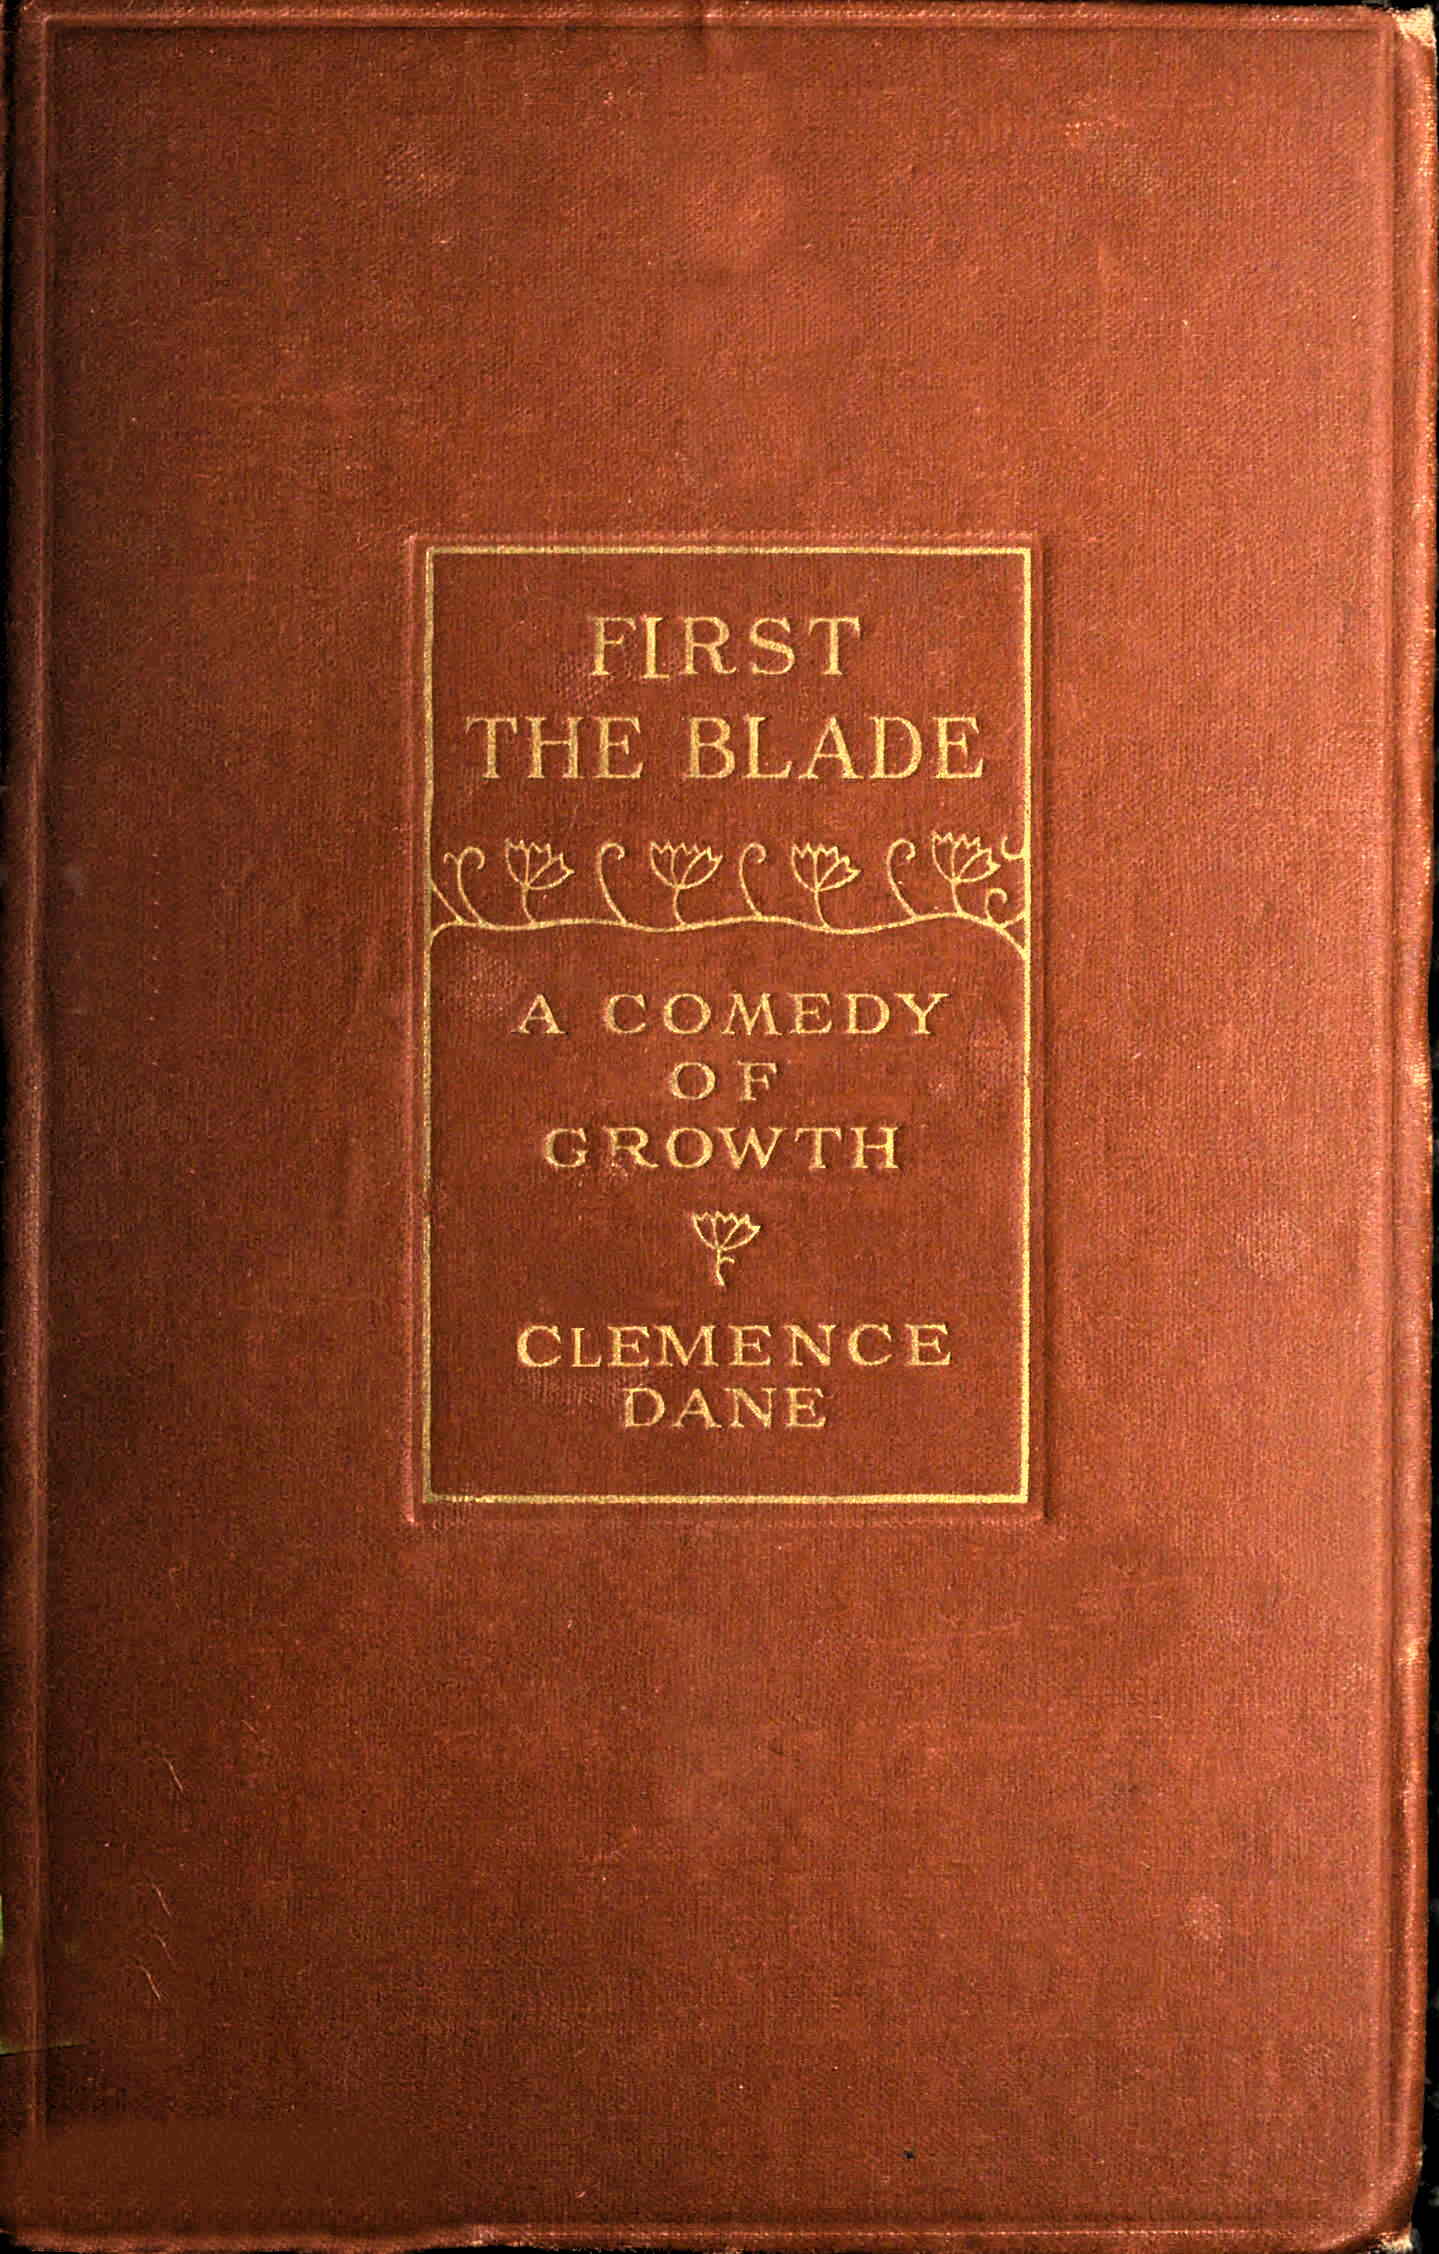 First the Blade, a Comedy of Growth, by Clemence Dane—A Project Gutenberg eBook